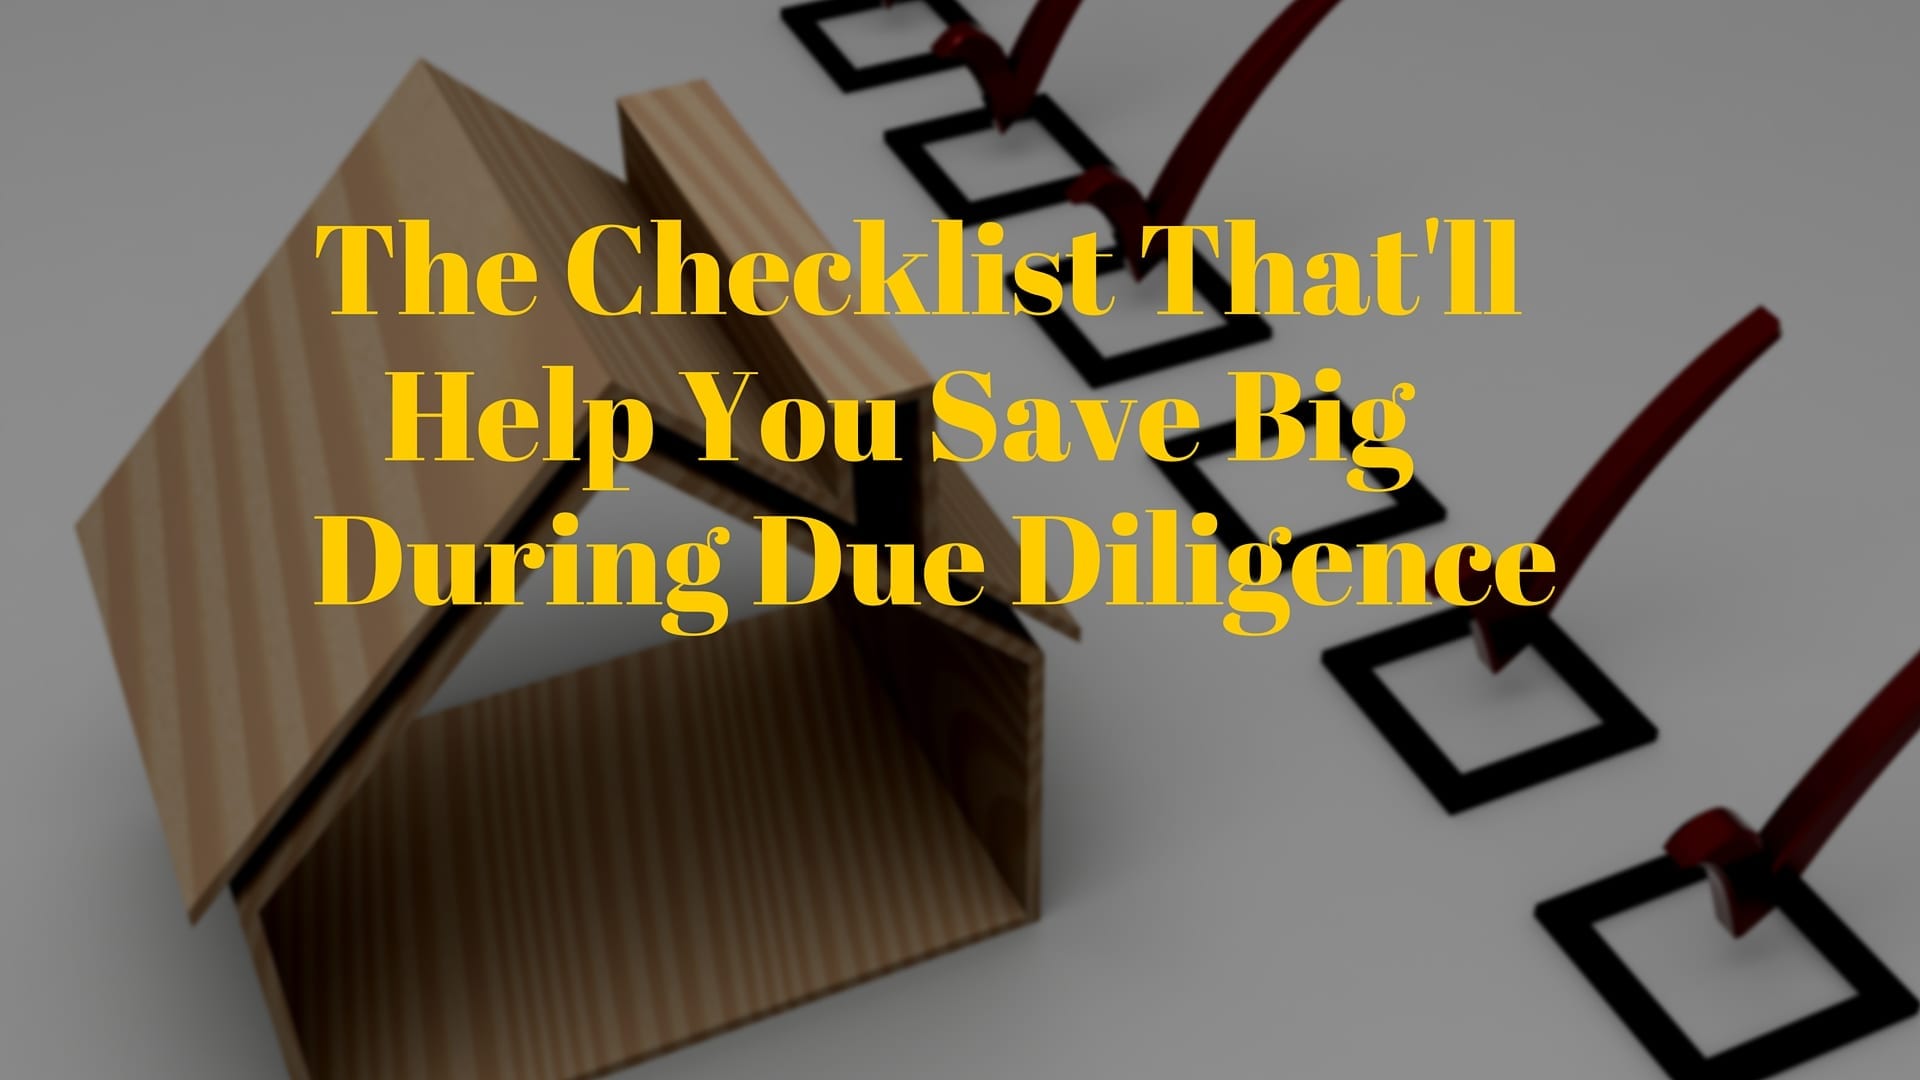 The Checklist That’ll Help You Save Big During Due Diligence